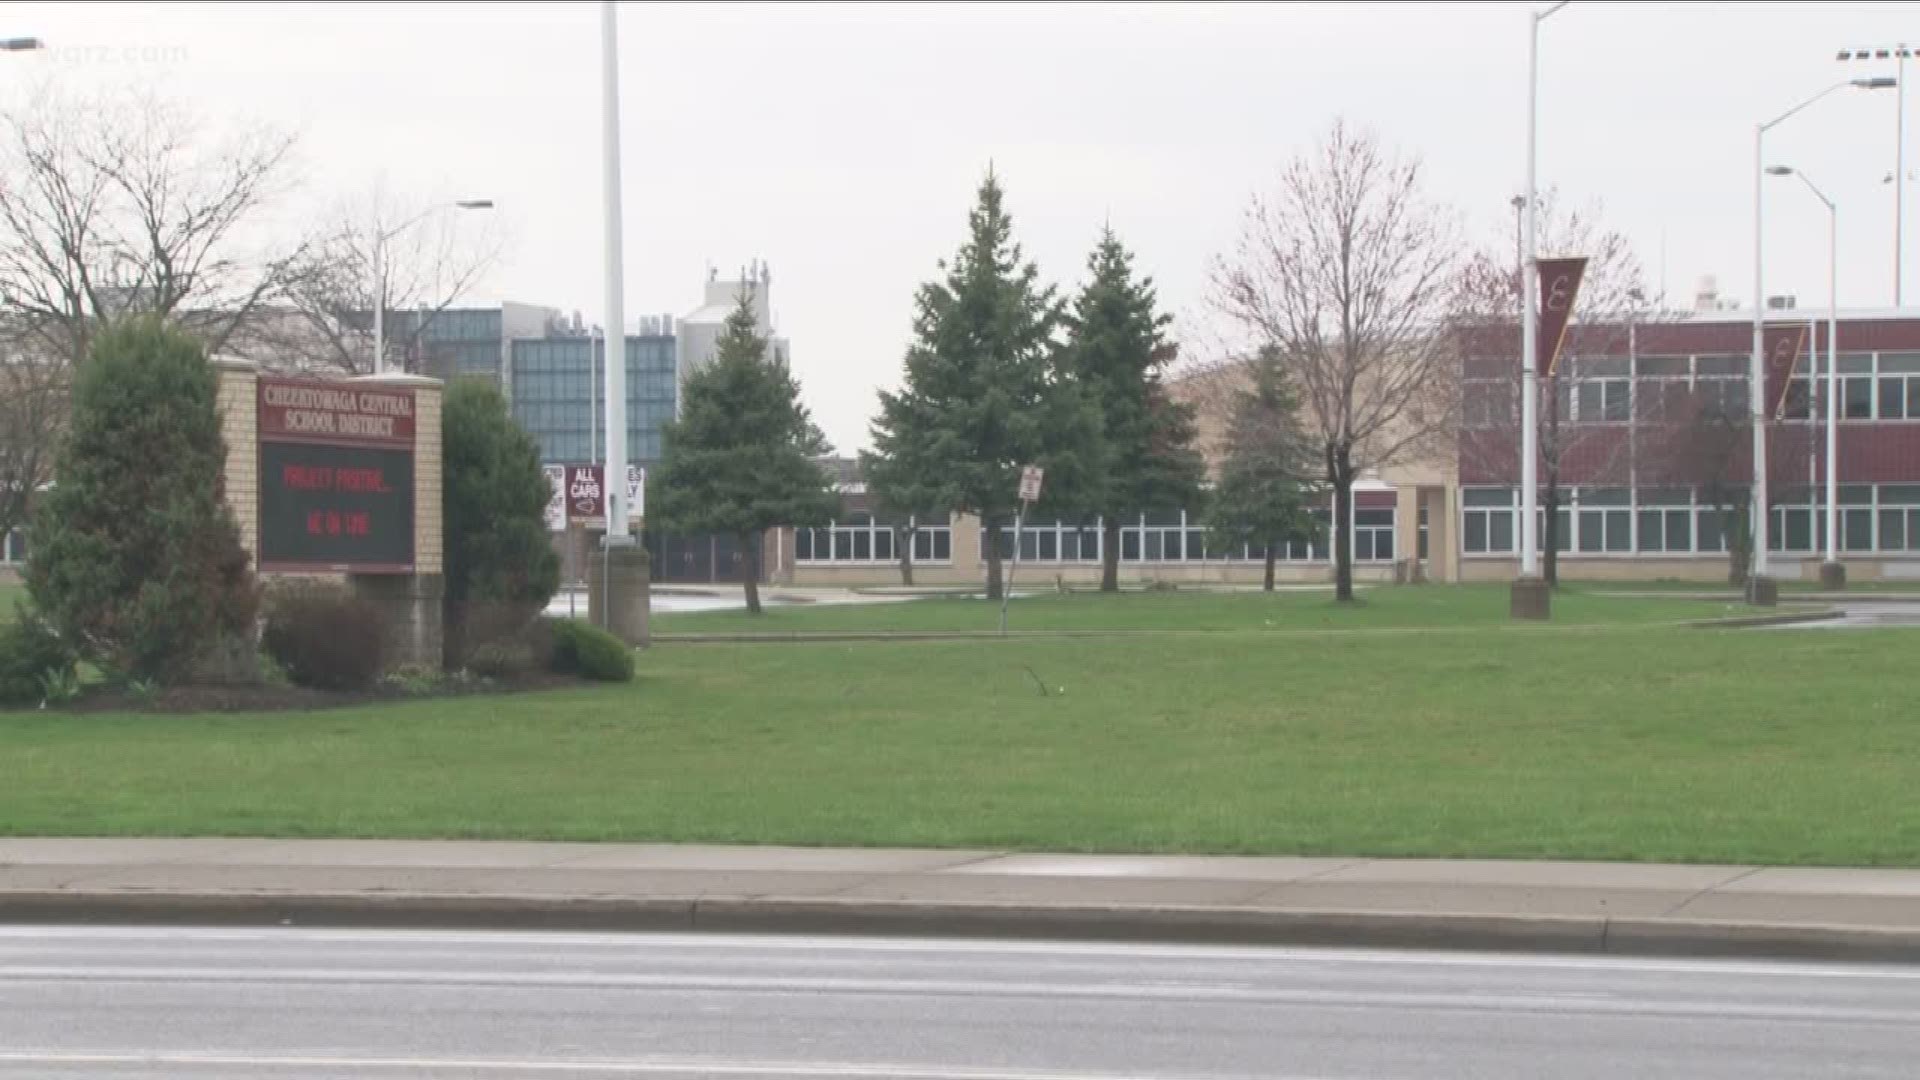 a new budget means big changes for the Cheektowaga Central School District